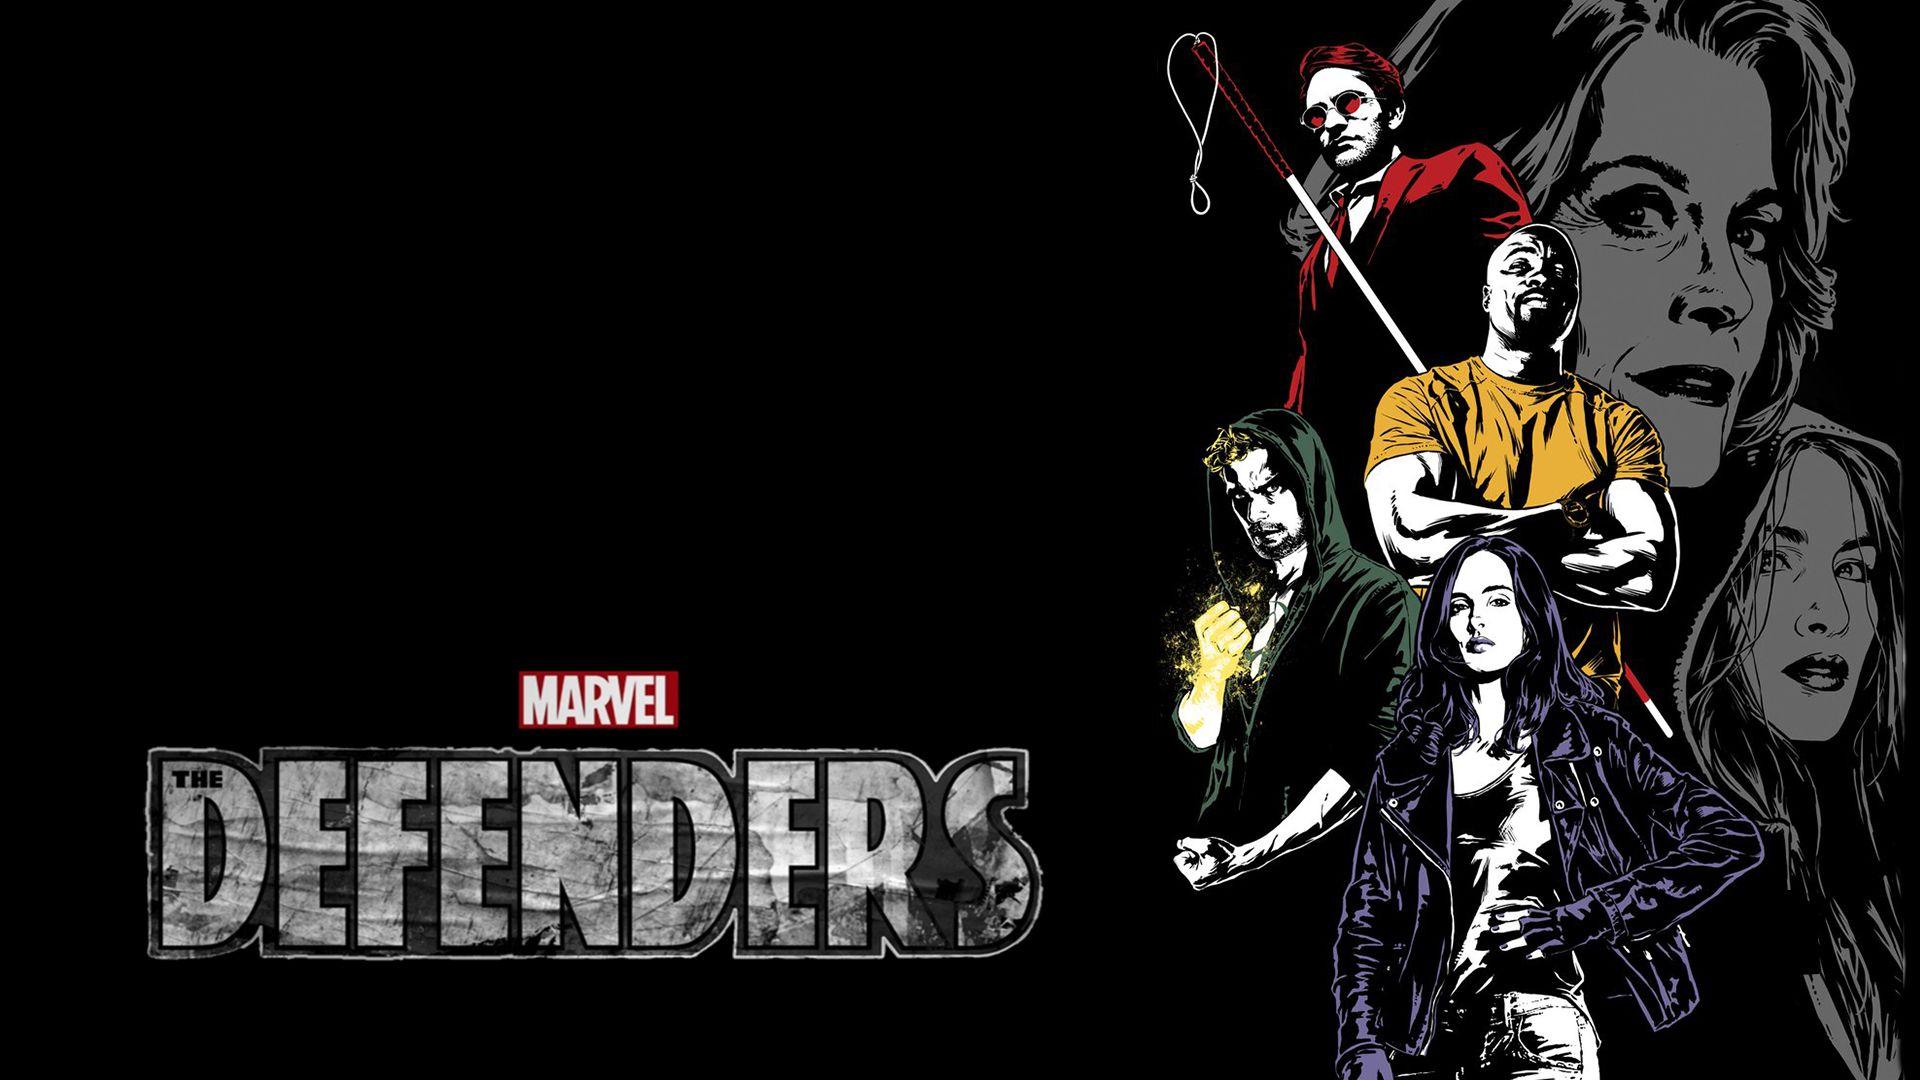 Marvel's The Defenders Wallpaper By The Dark Mamba 995